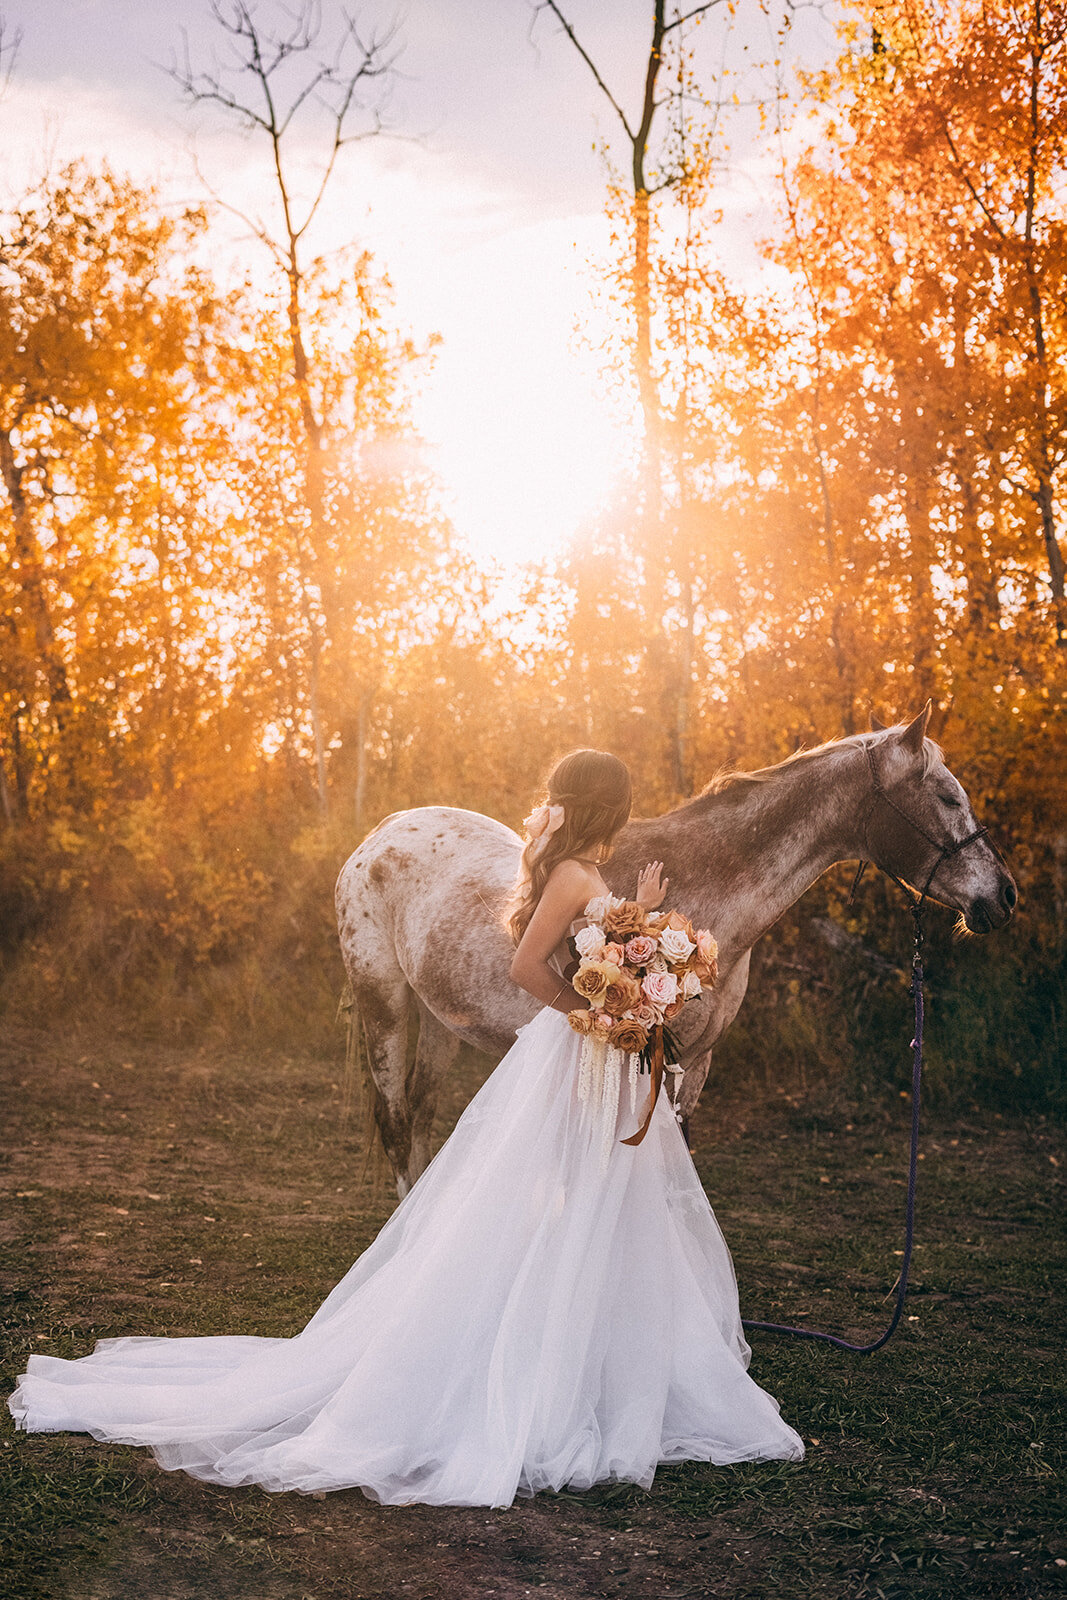 Stunning bridals with horse at River's Edge, a picturesque country wedding venue in Devon, Alberta, featured on the Brontë Bride Vendor Guide.